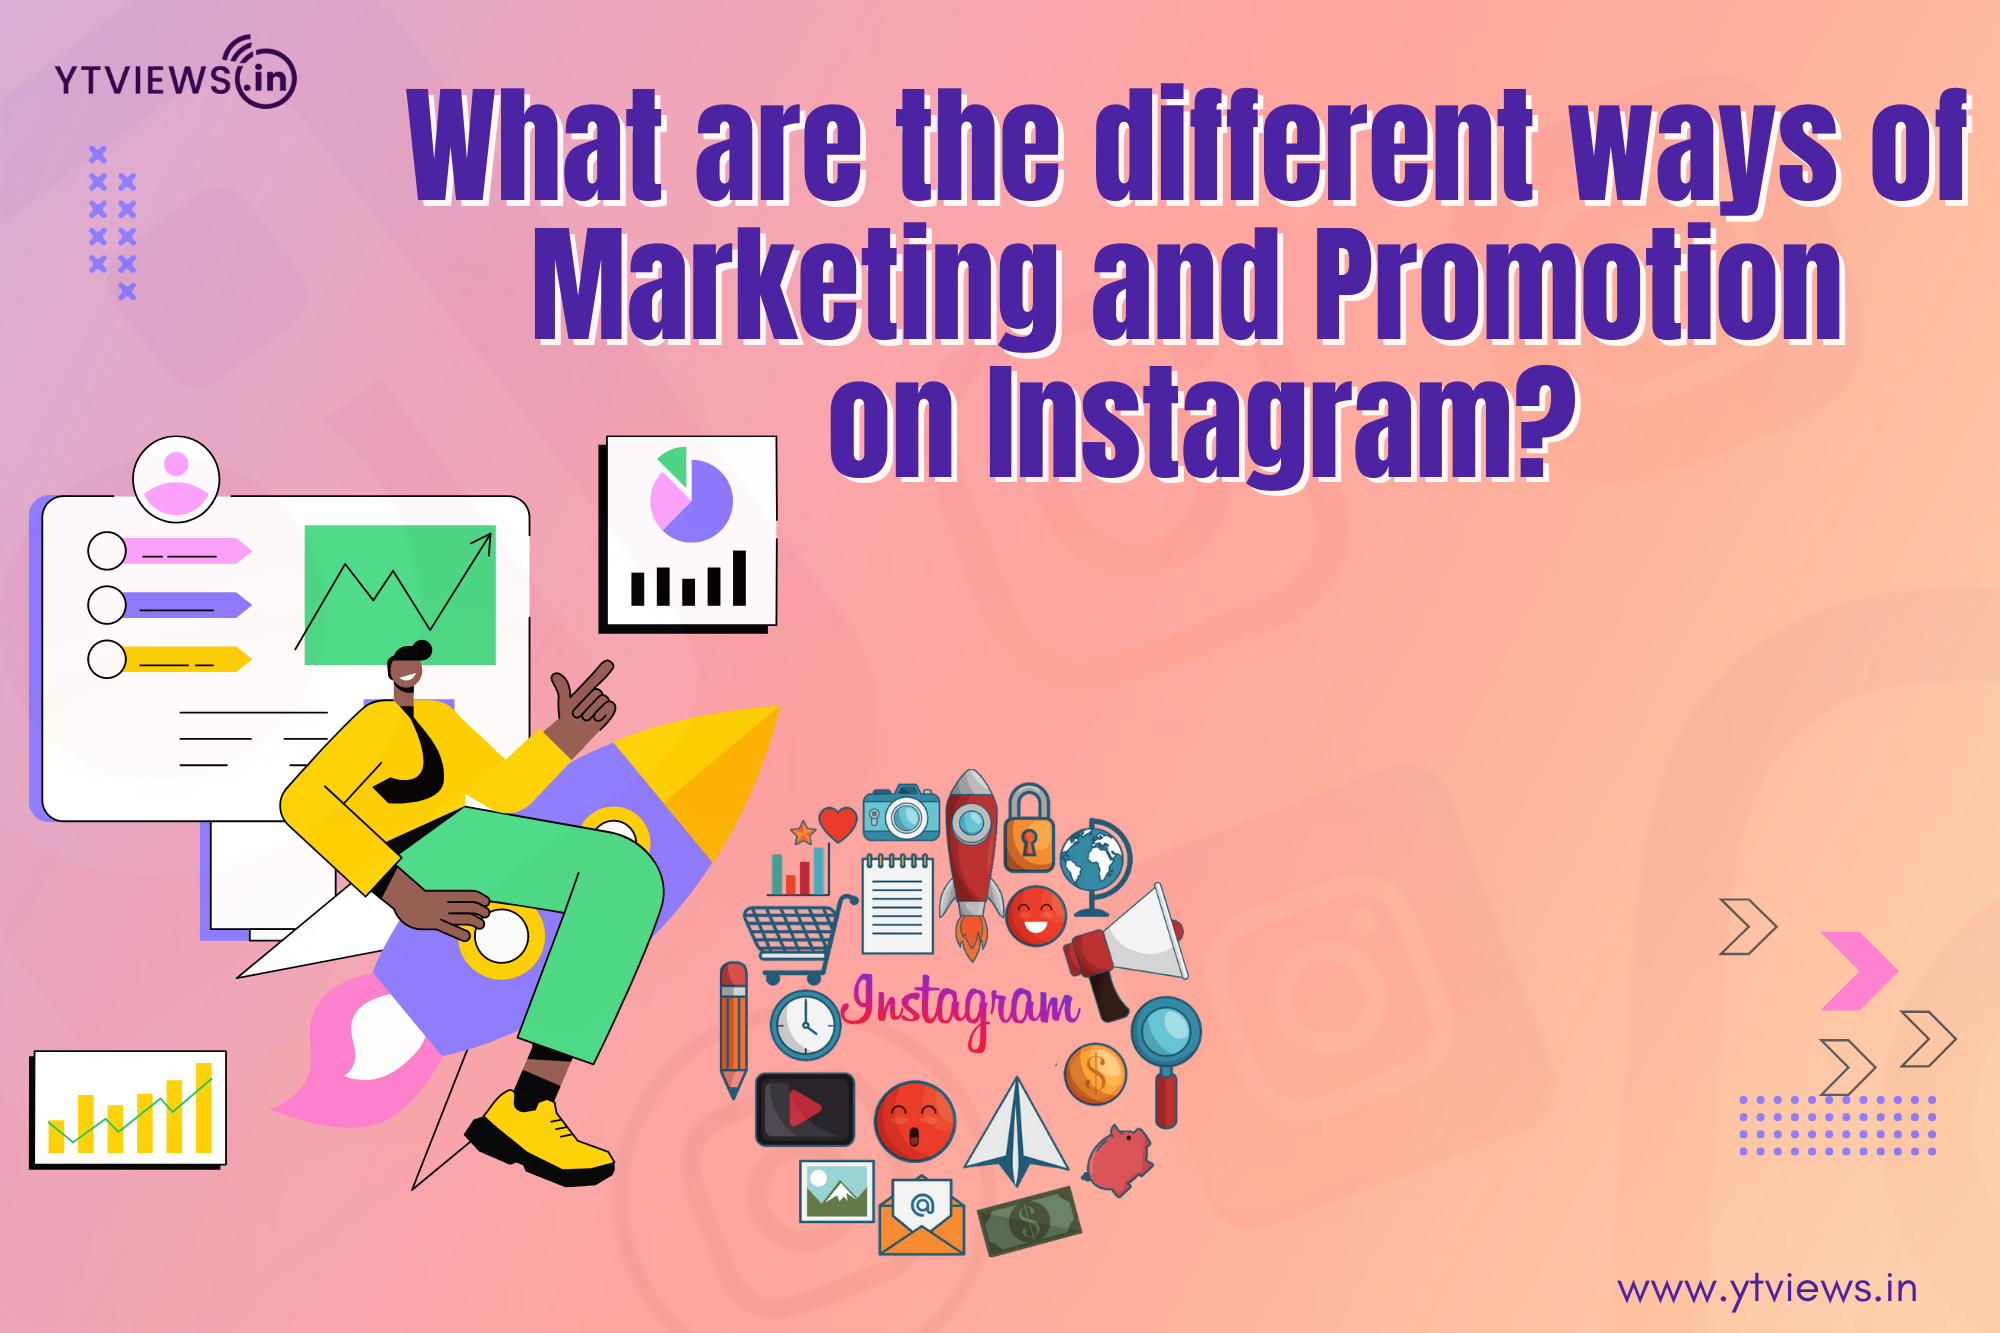 What are the different ways of Marketing and Promotion on Instagram?